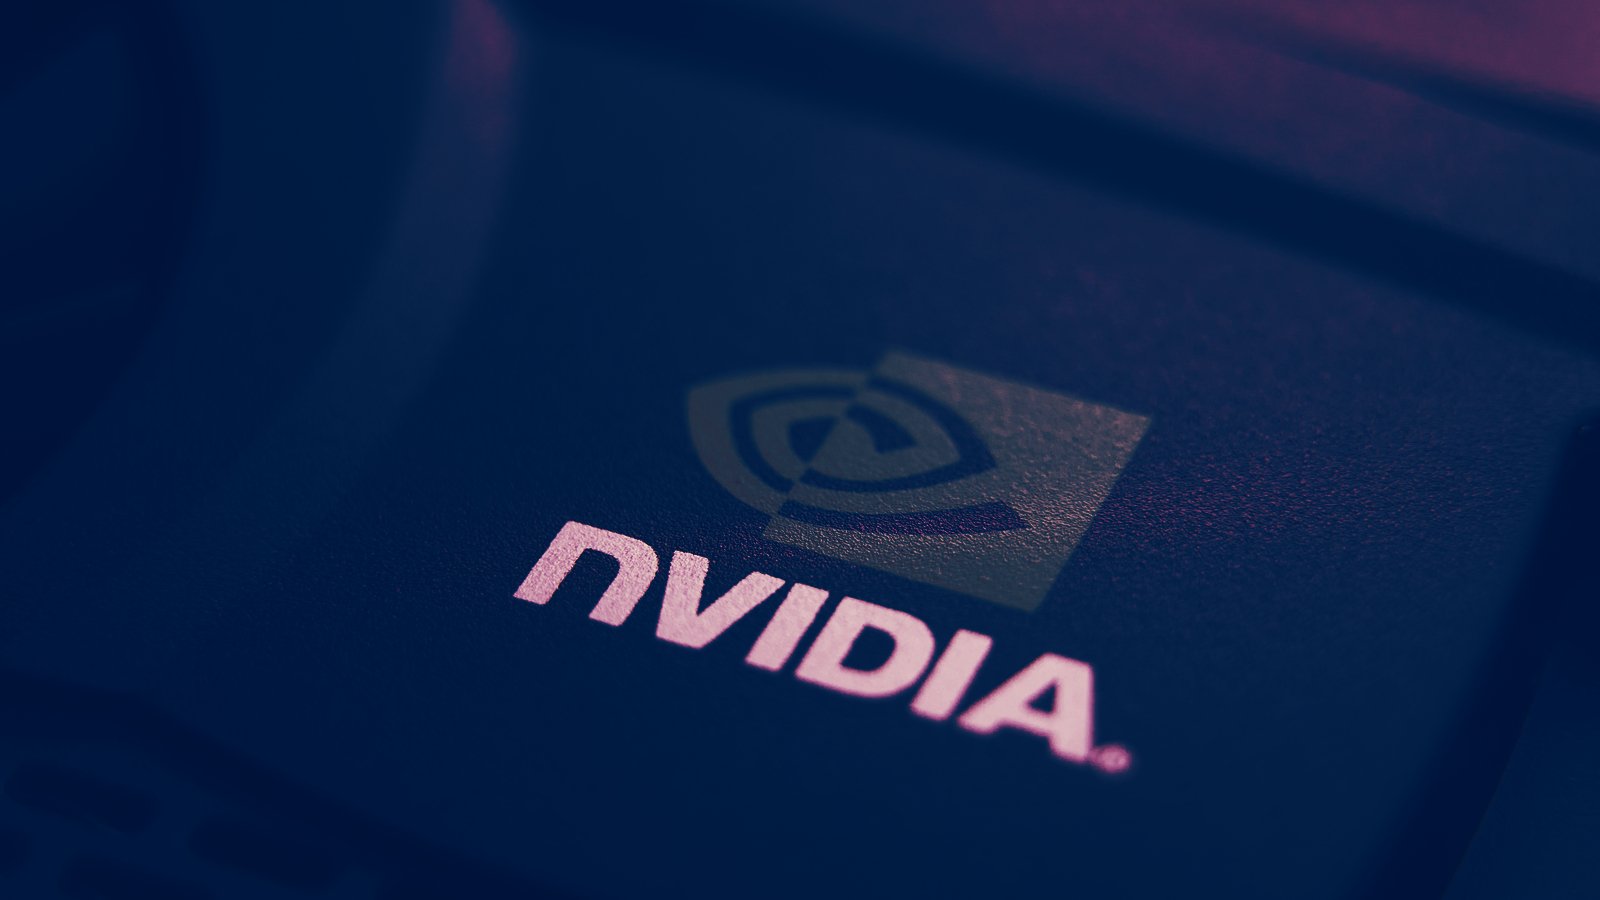 Nvidia Has 'Limited Visibility' on Crypto Mining Impact in Q2 Revenue Drop